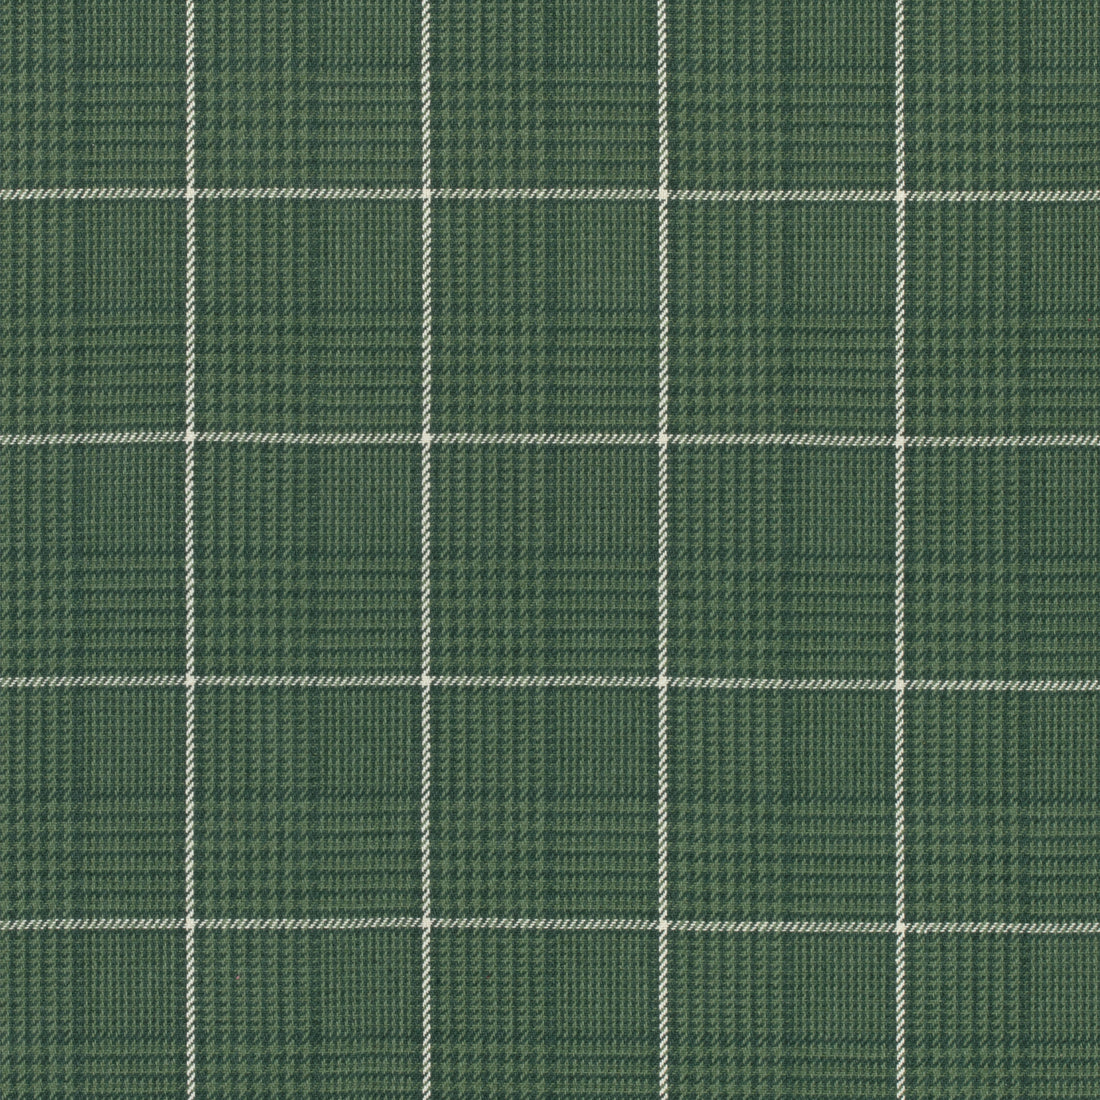 Grassmarket Check fabric in forest green color - pattern number W710202 - by Thibaut in the Colony collection